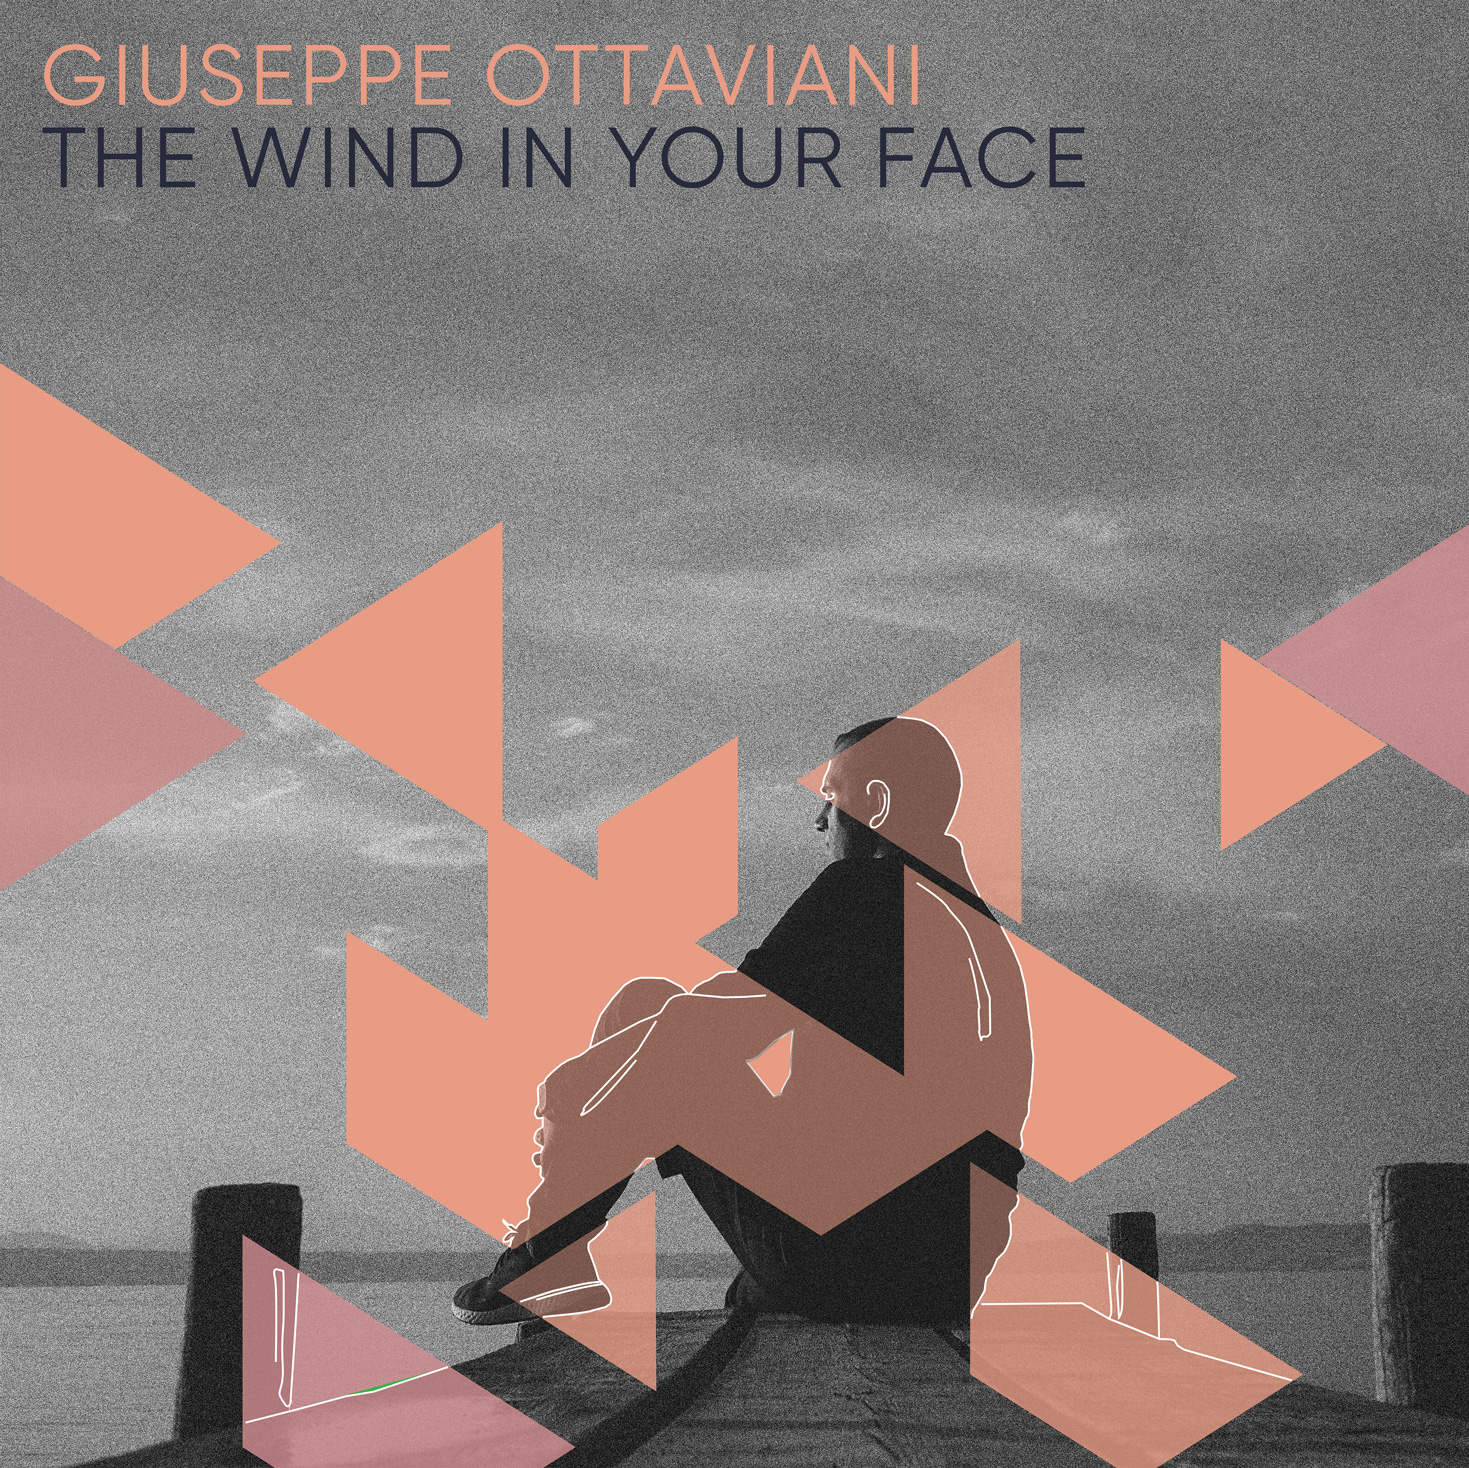 Giuseppe Ottaviani presents The Wind in Your Face on Black Hole Recordings